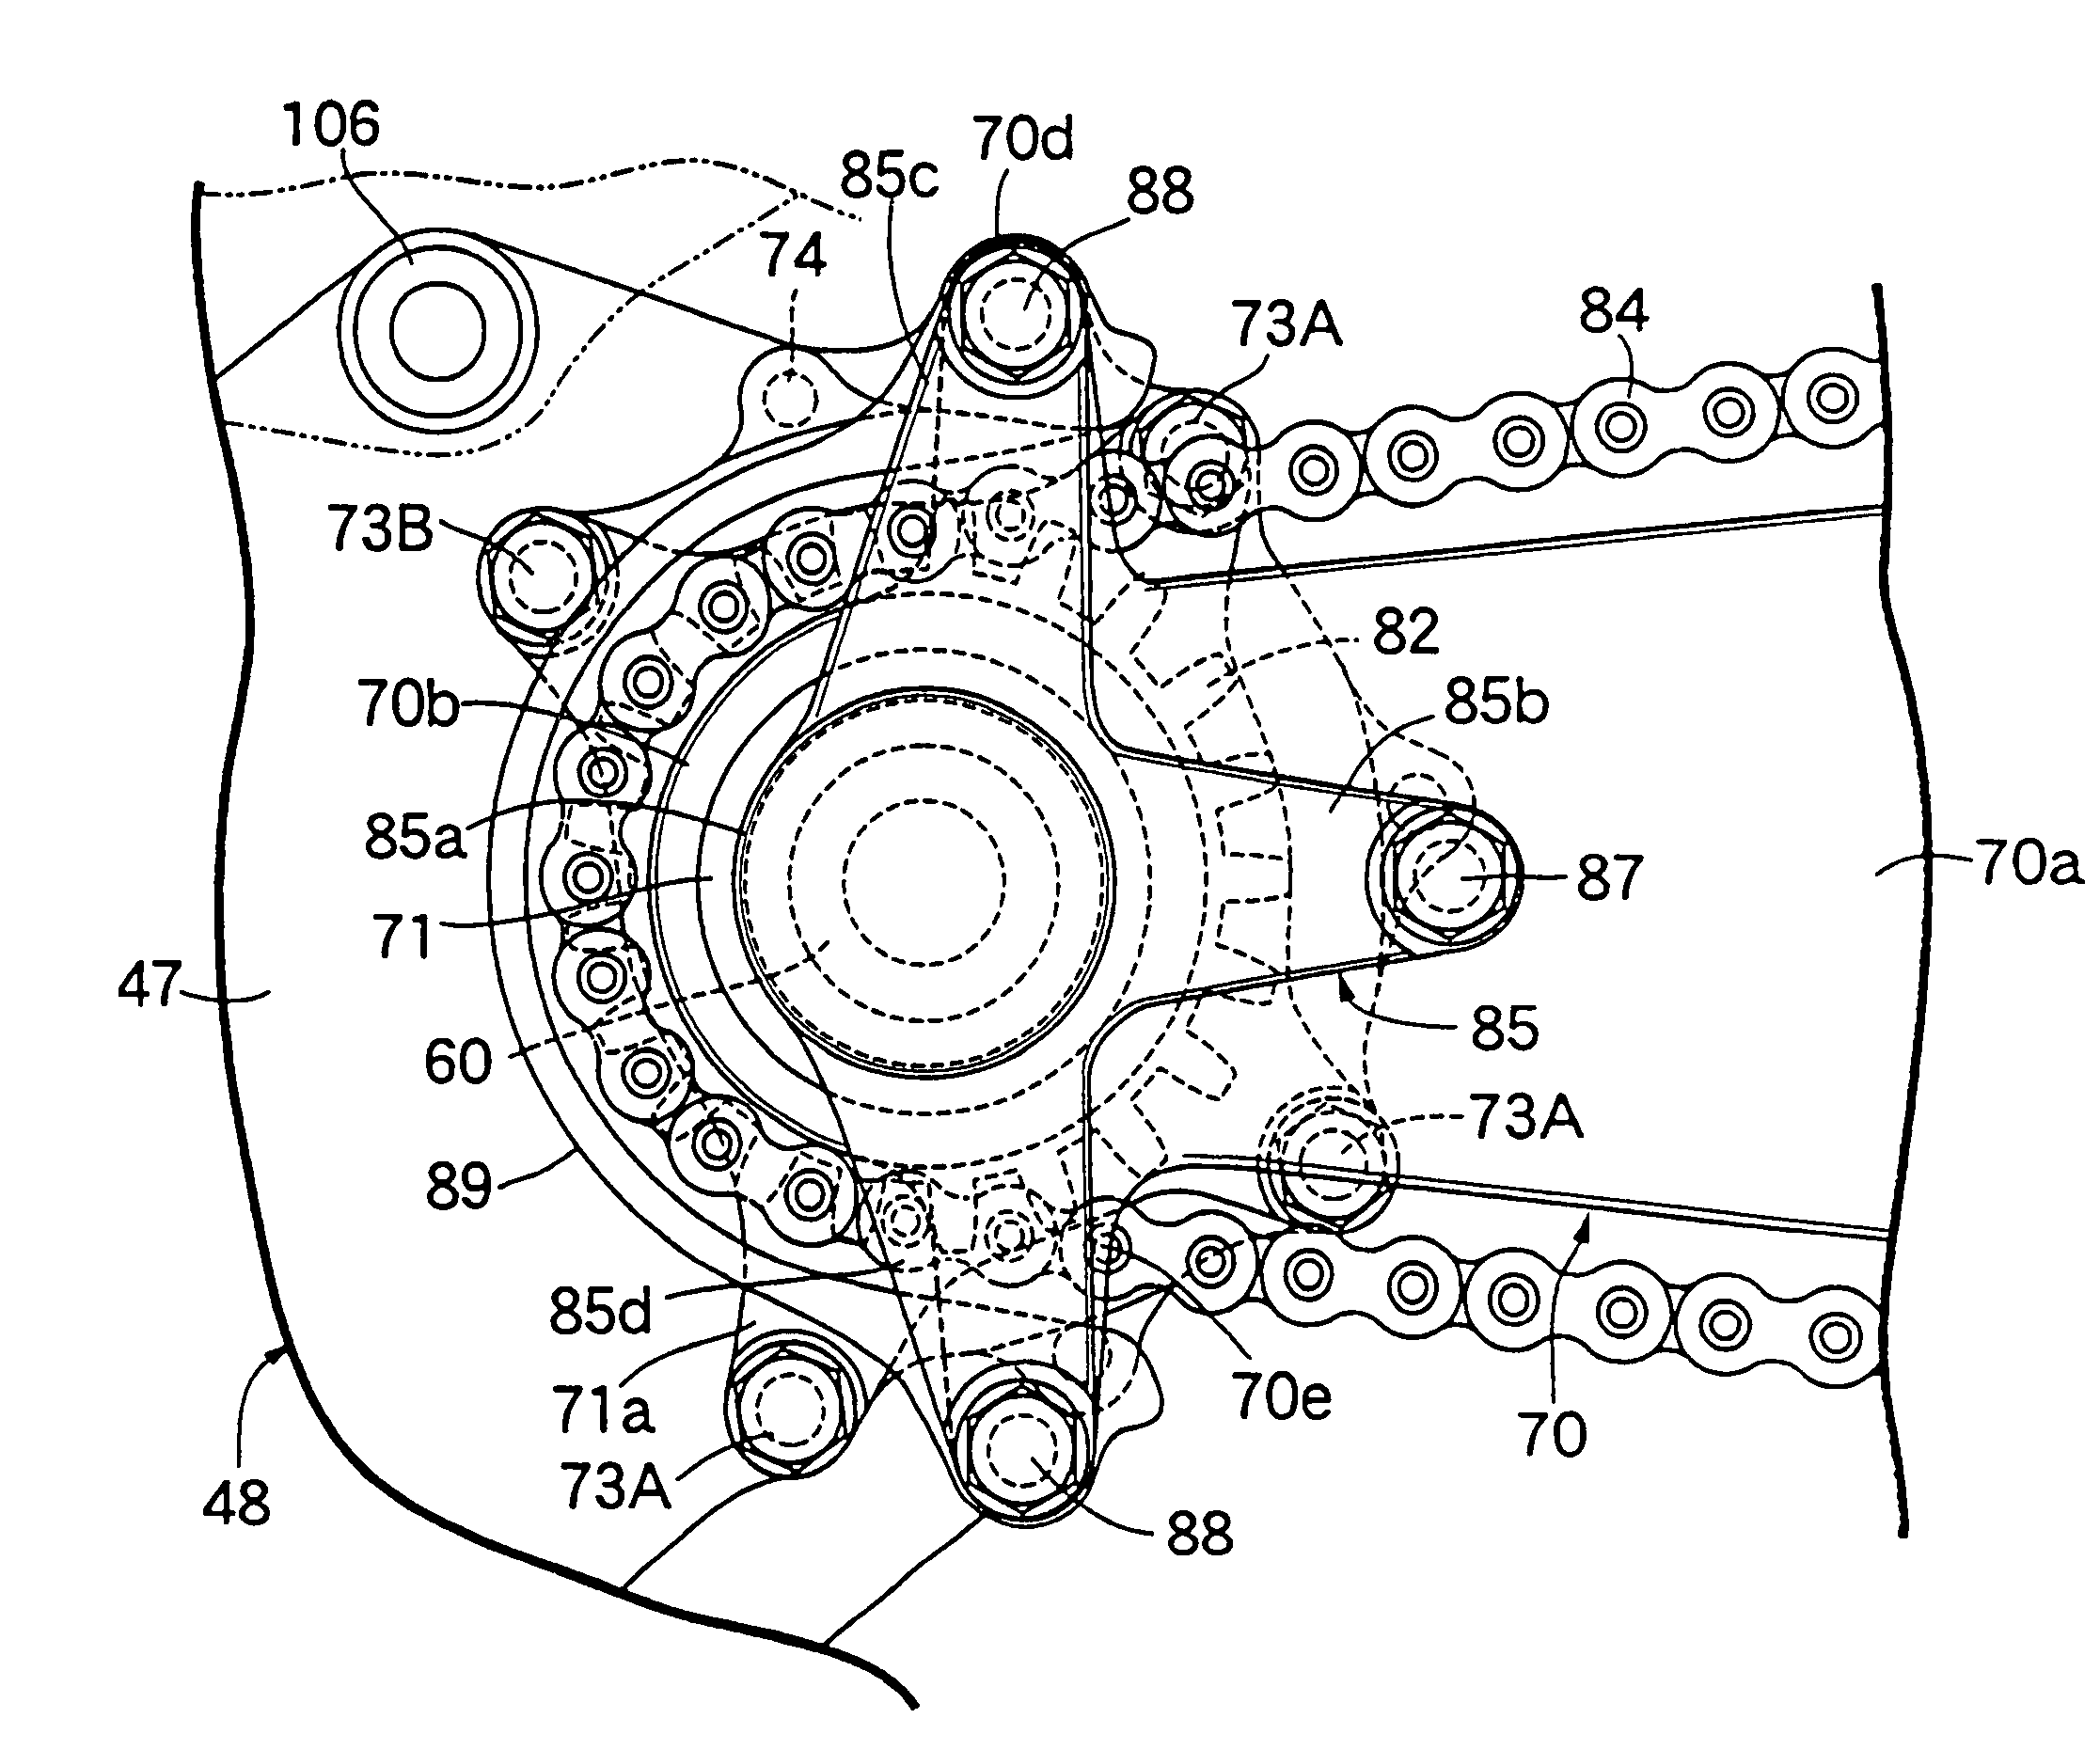 Swing arm support structure in a motorcycle, and motorcycle incorporating same